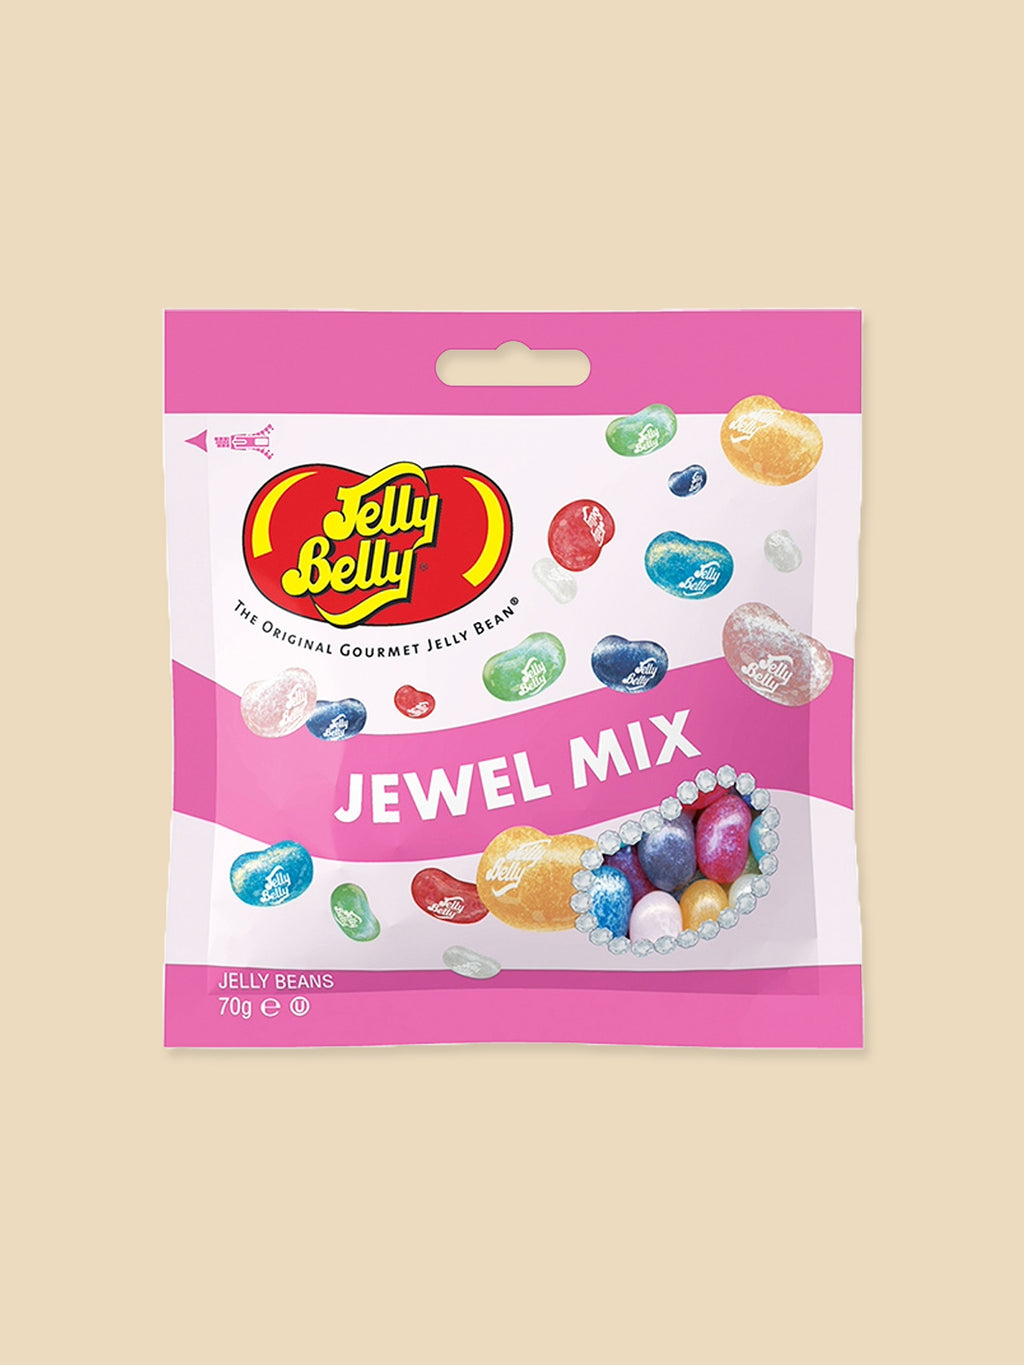 Jelly Belly Jelly Beans - Jewel Mix - 70g